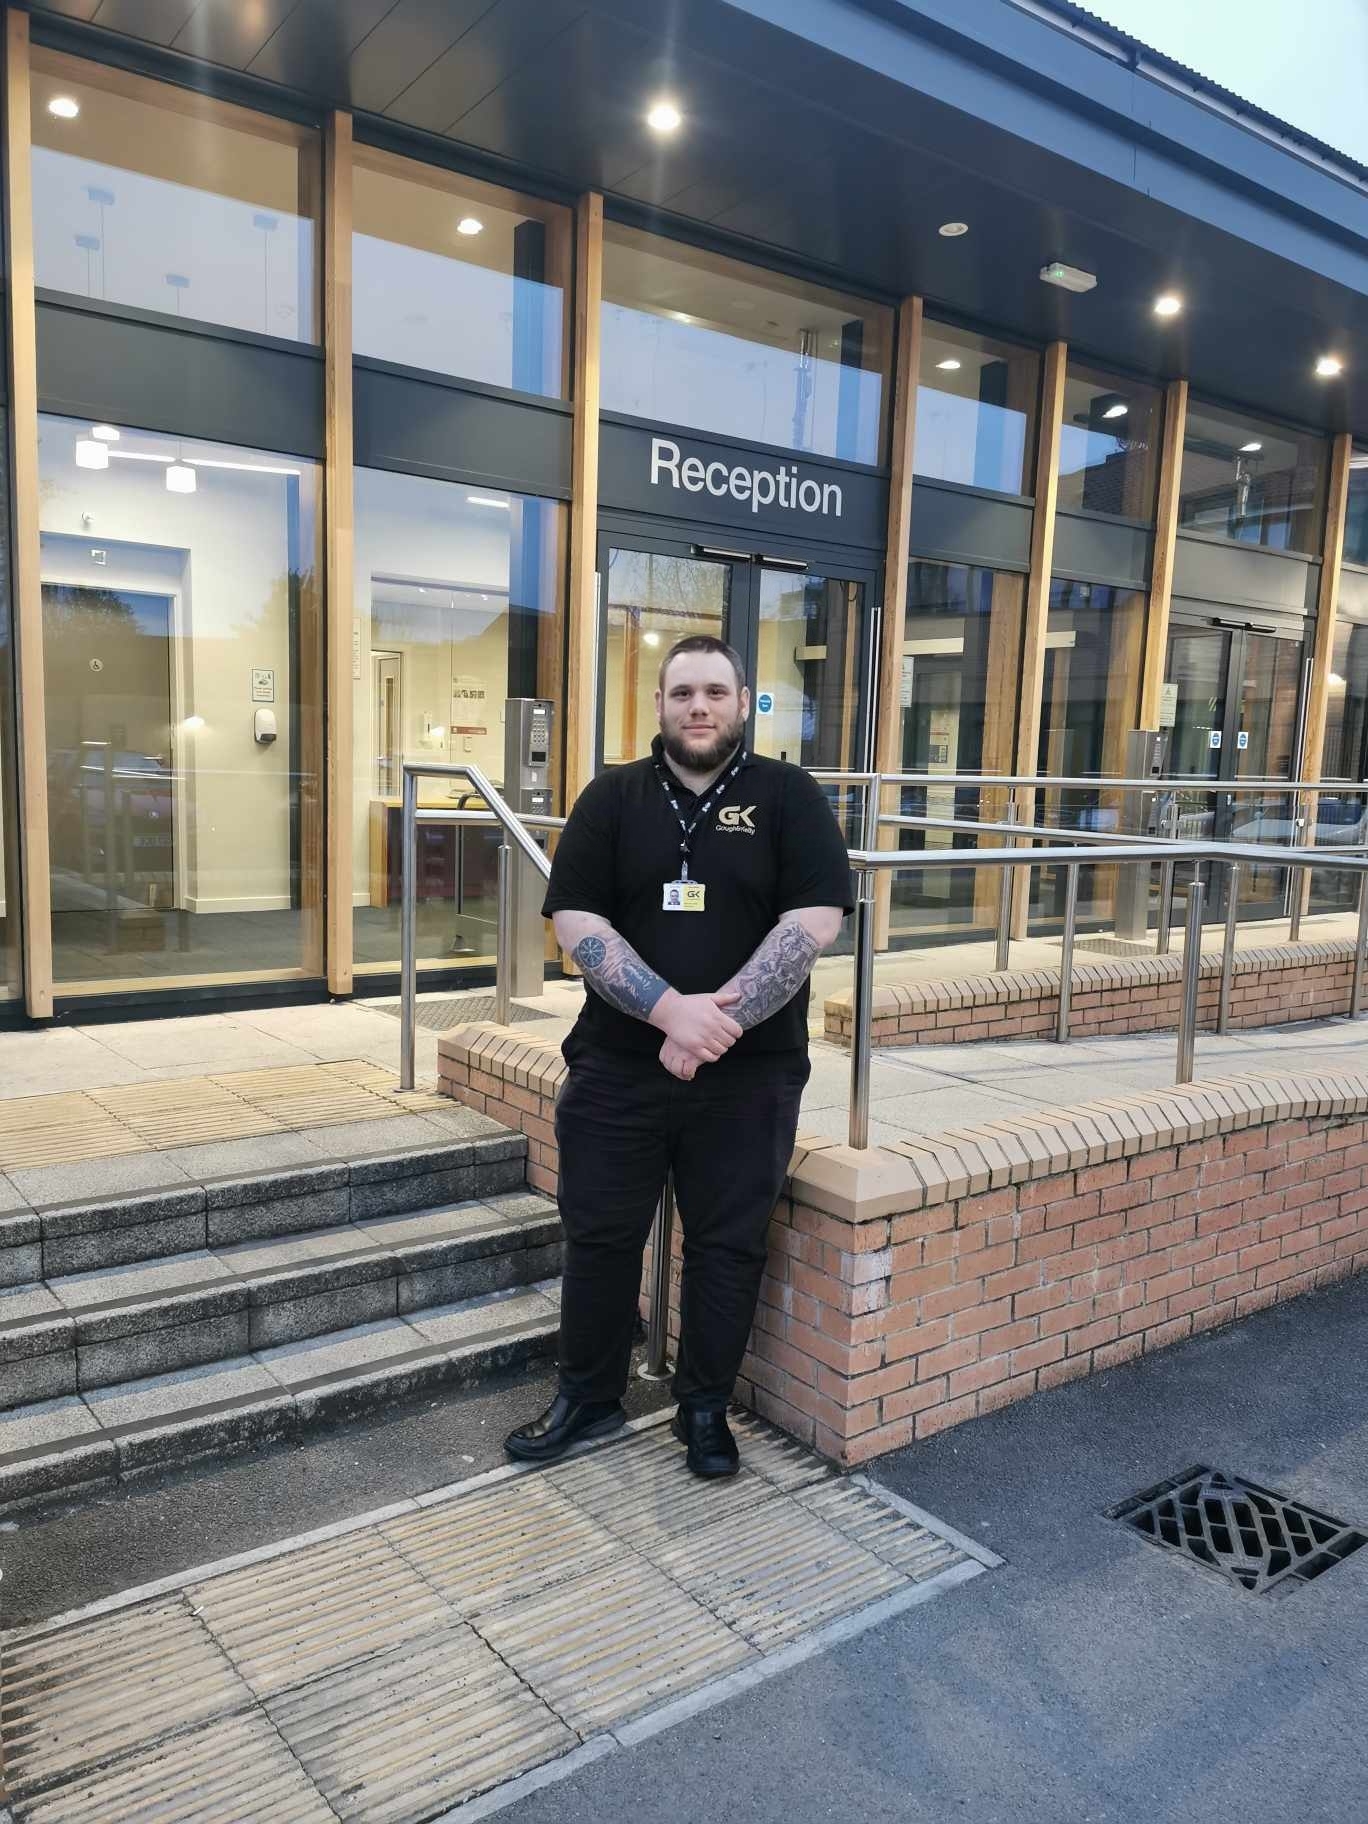 James House security officer hailed for heroic actions in response to fire emergency